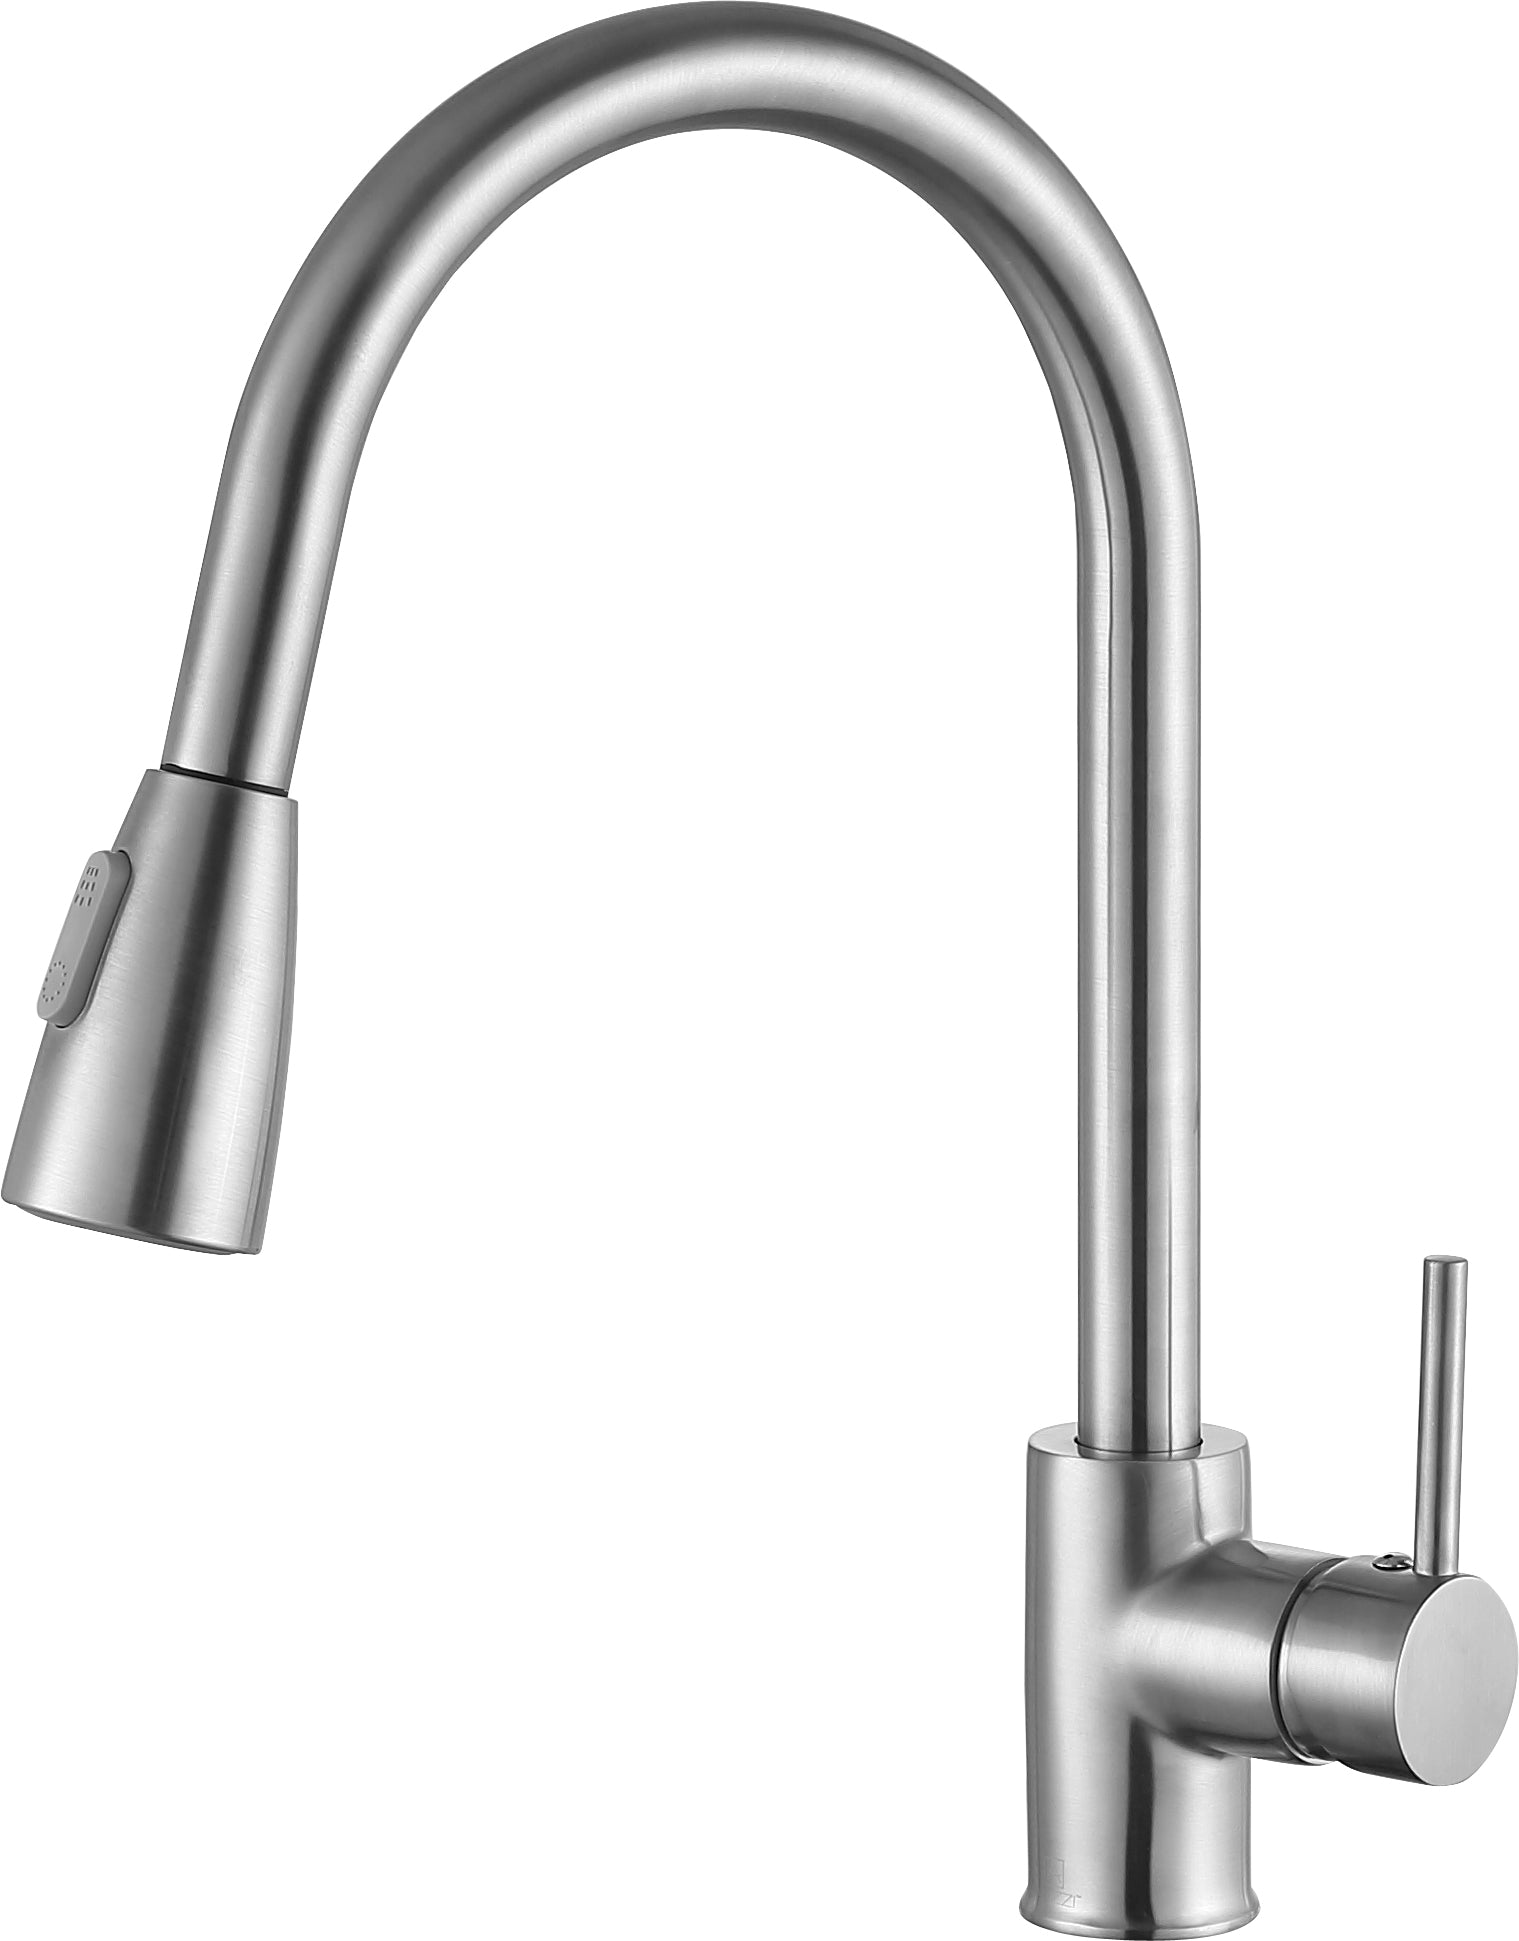 KF-AZ212BN - Sire Single-Handle Pull-Out Sprayer Kitchen Faucet in Brushed Nickel